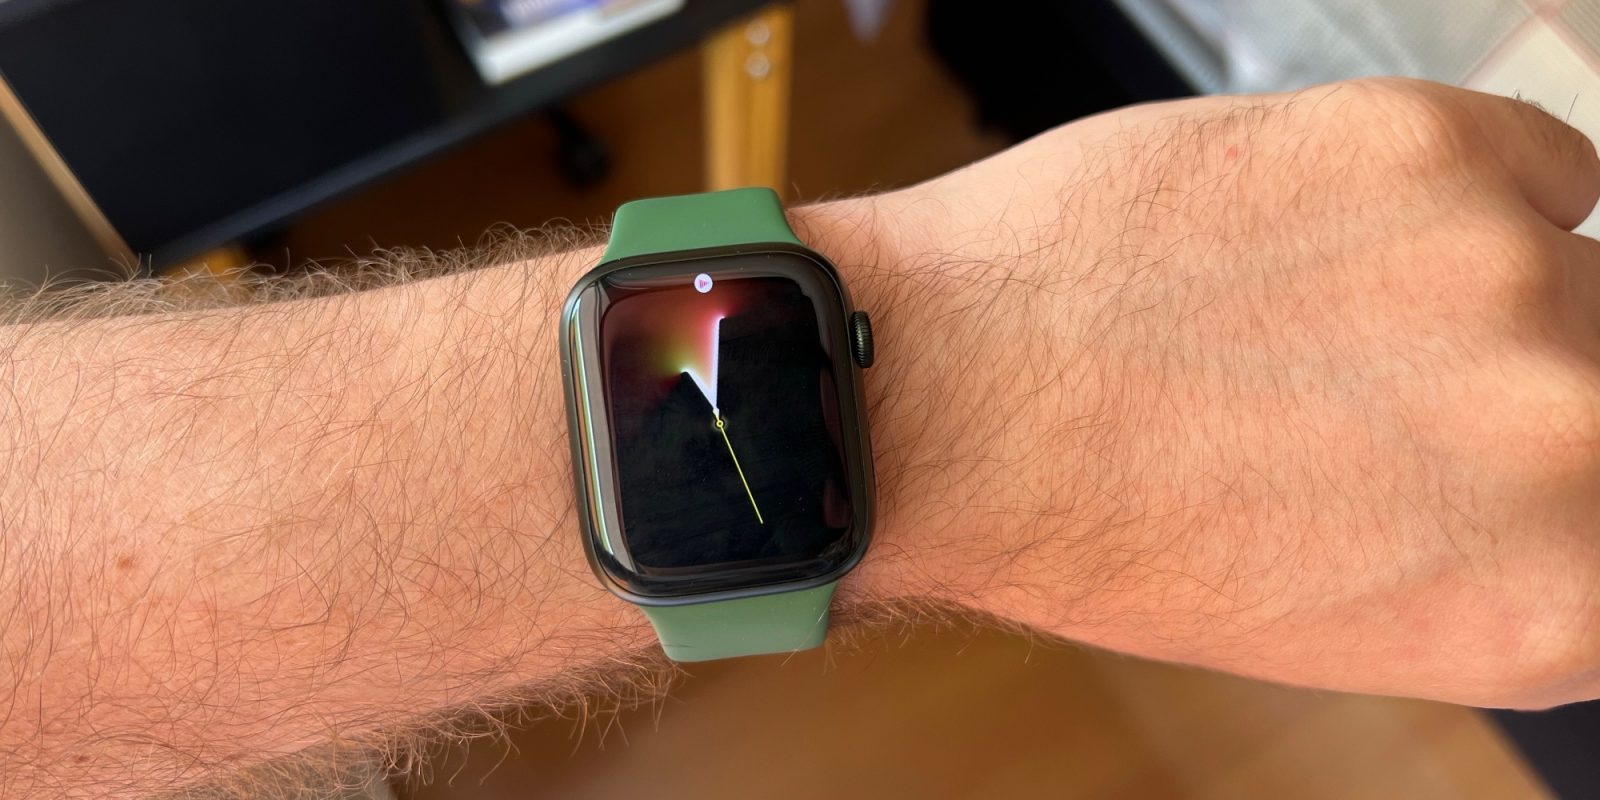 Here’s how to add and customize the new ‘Unity Lights’ Apple Watch face